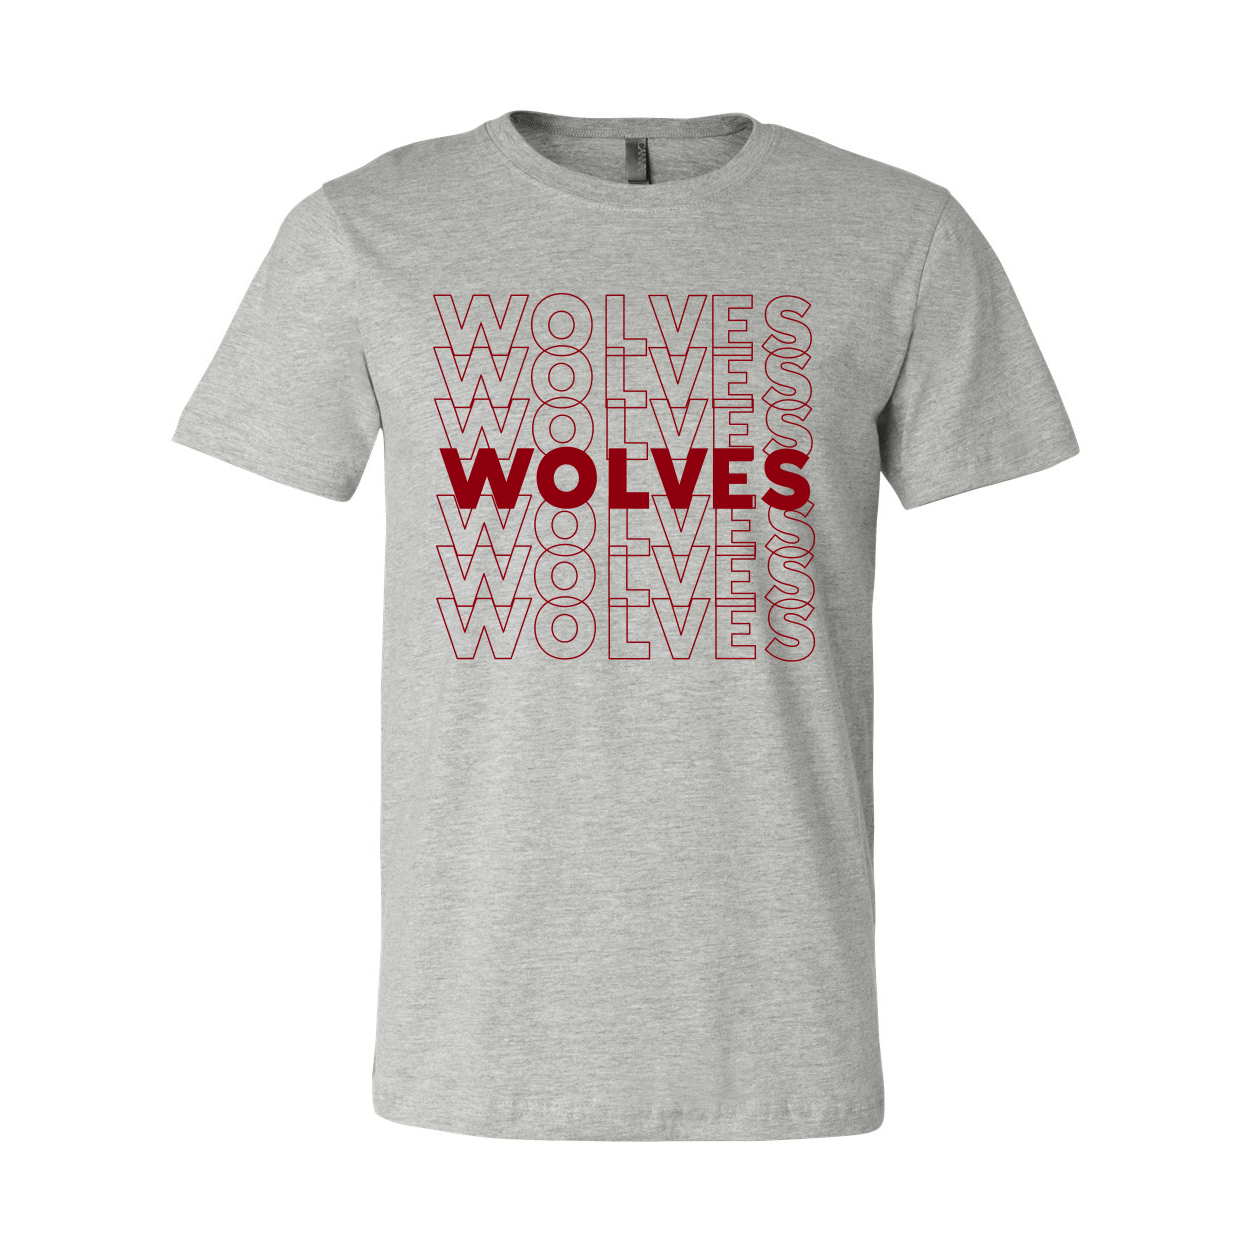 Lincoln Wolves T-Shirt